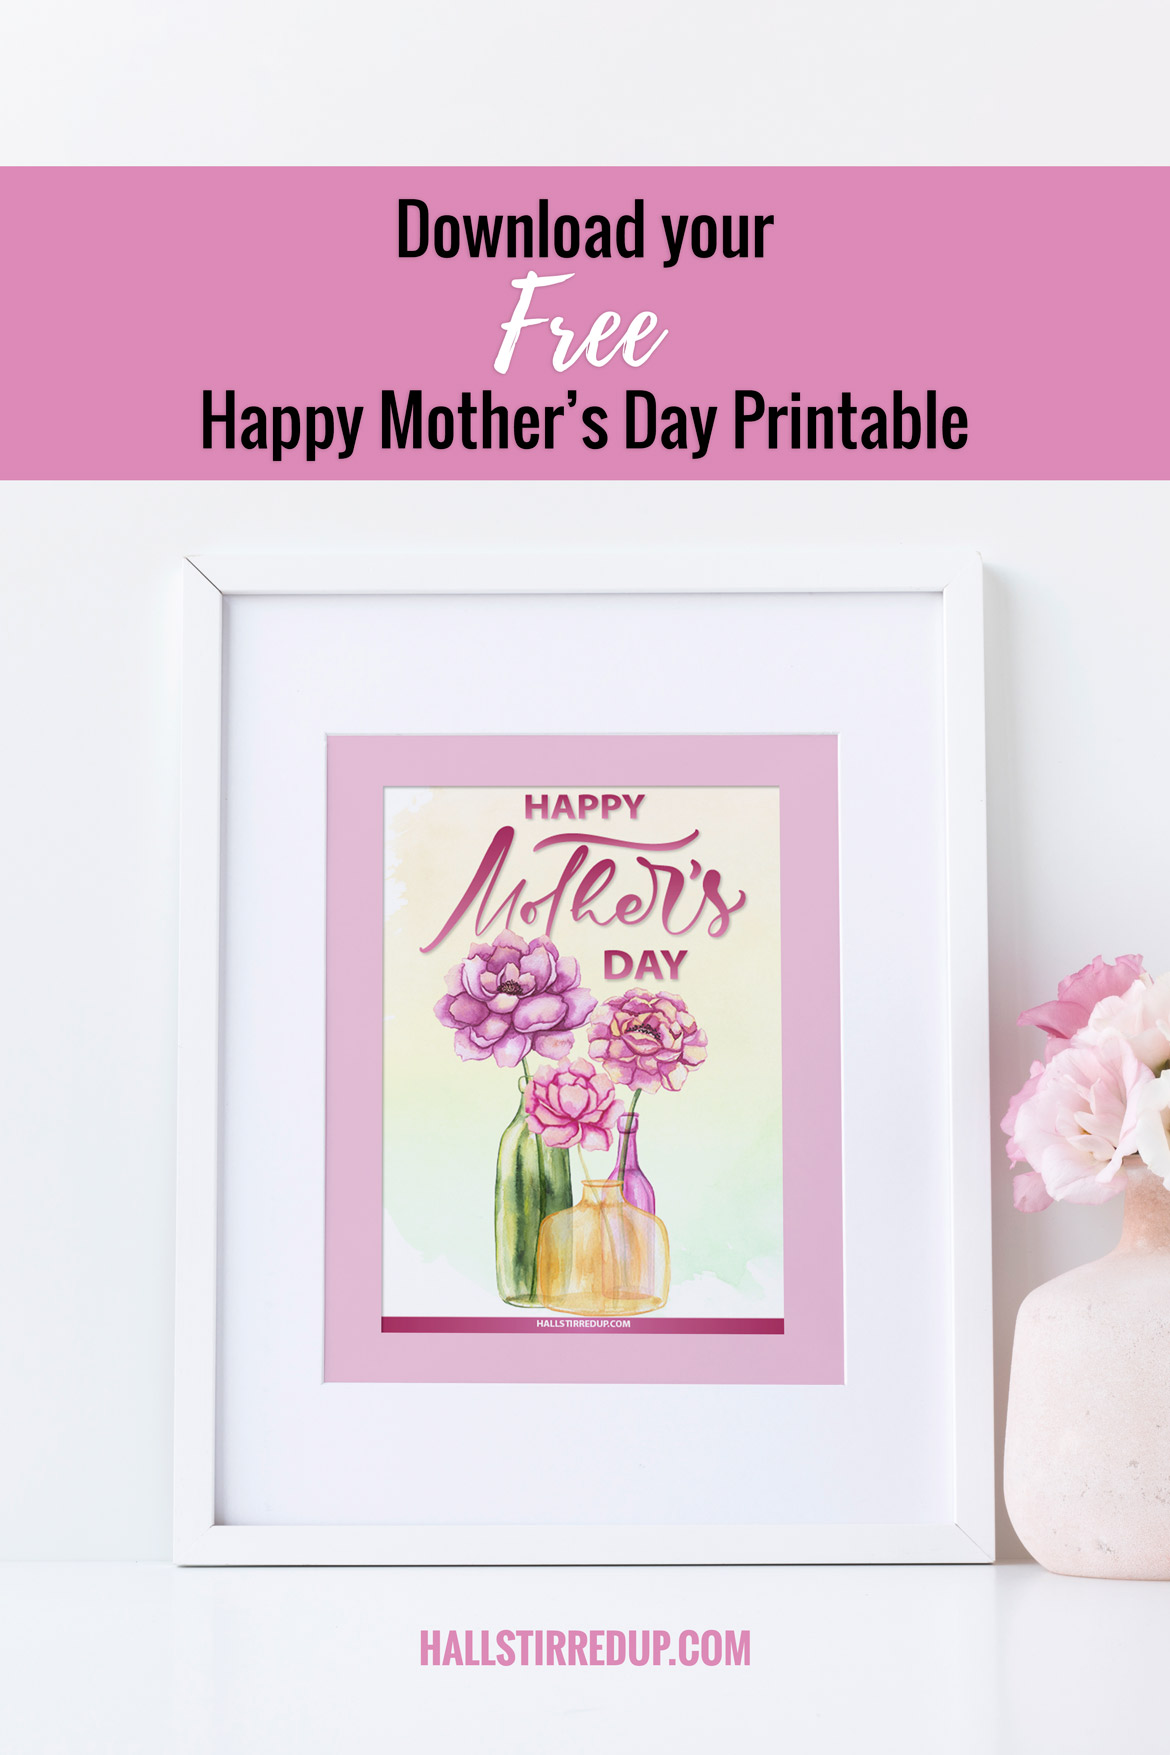 Say Happy Mother's Day with a pretty printable